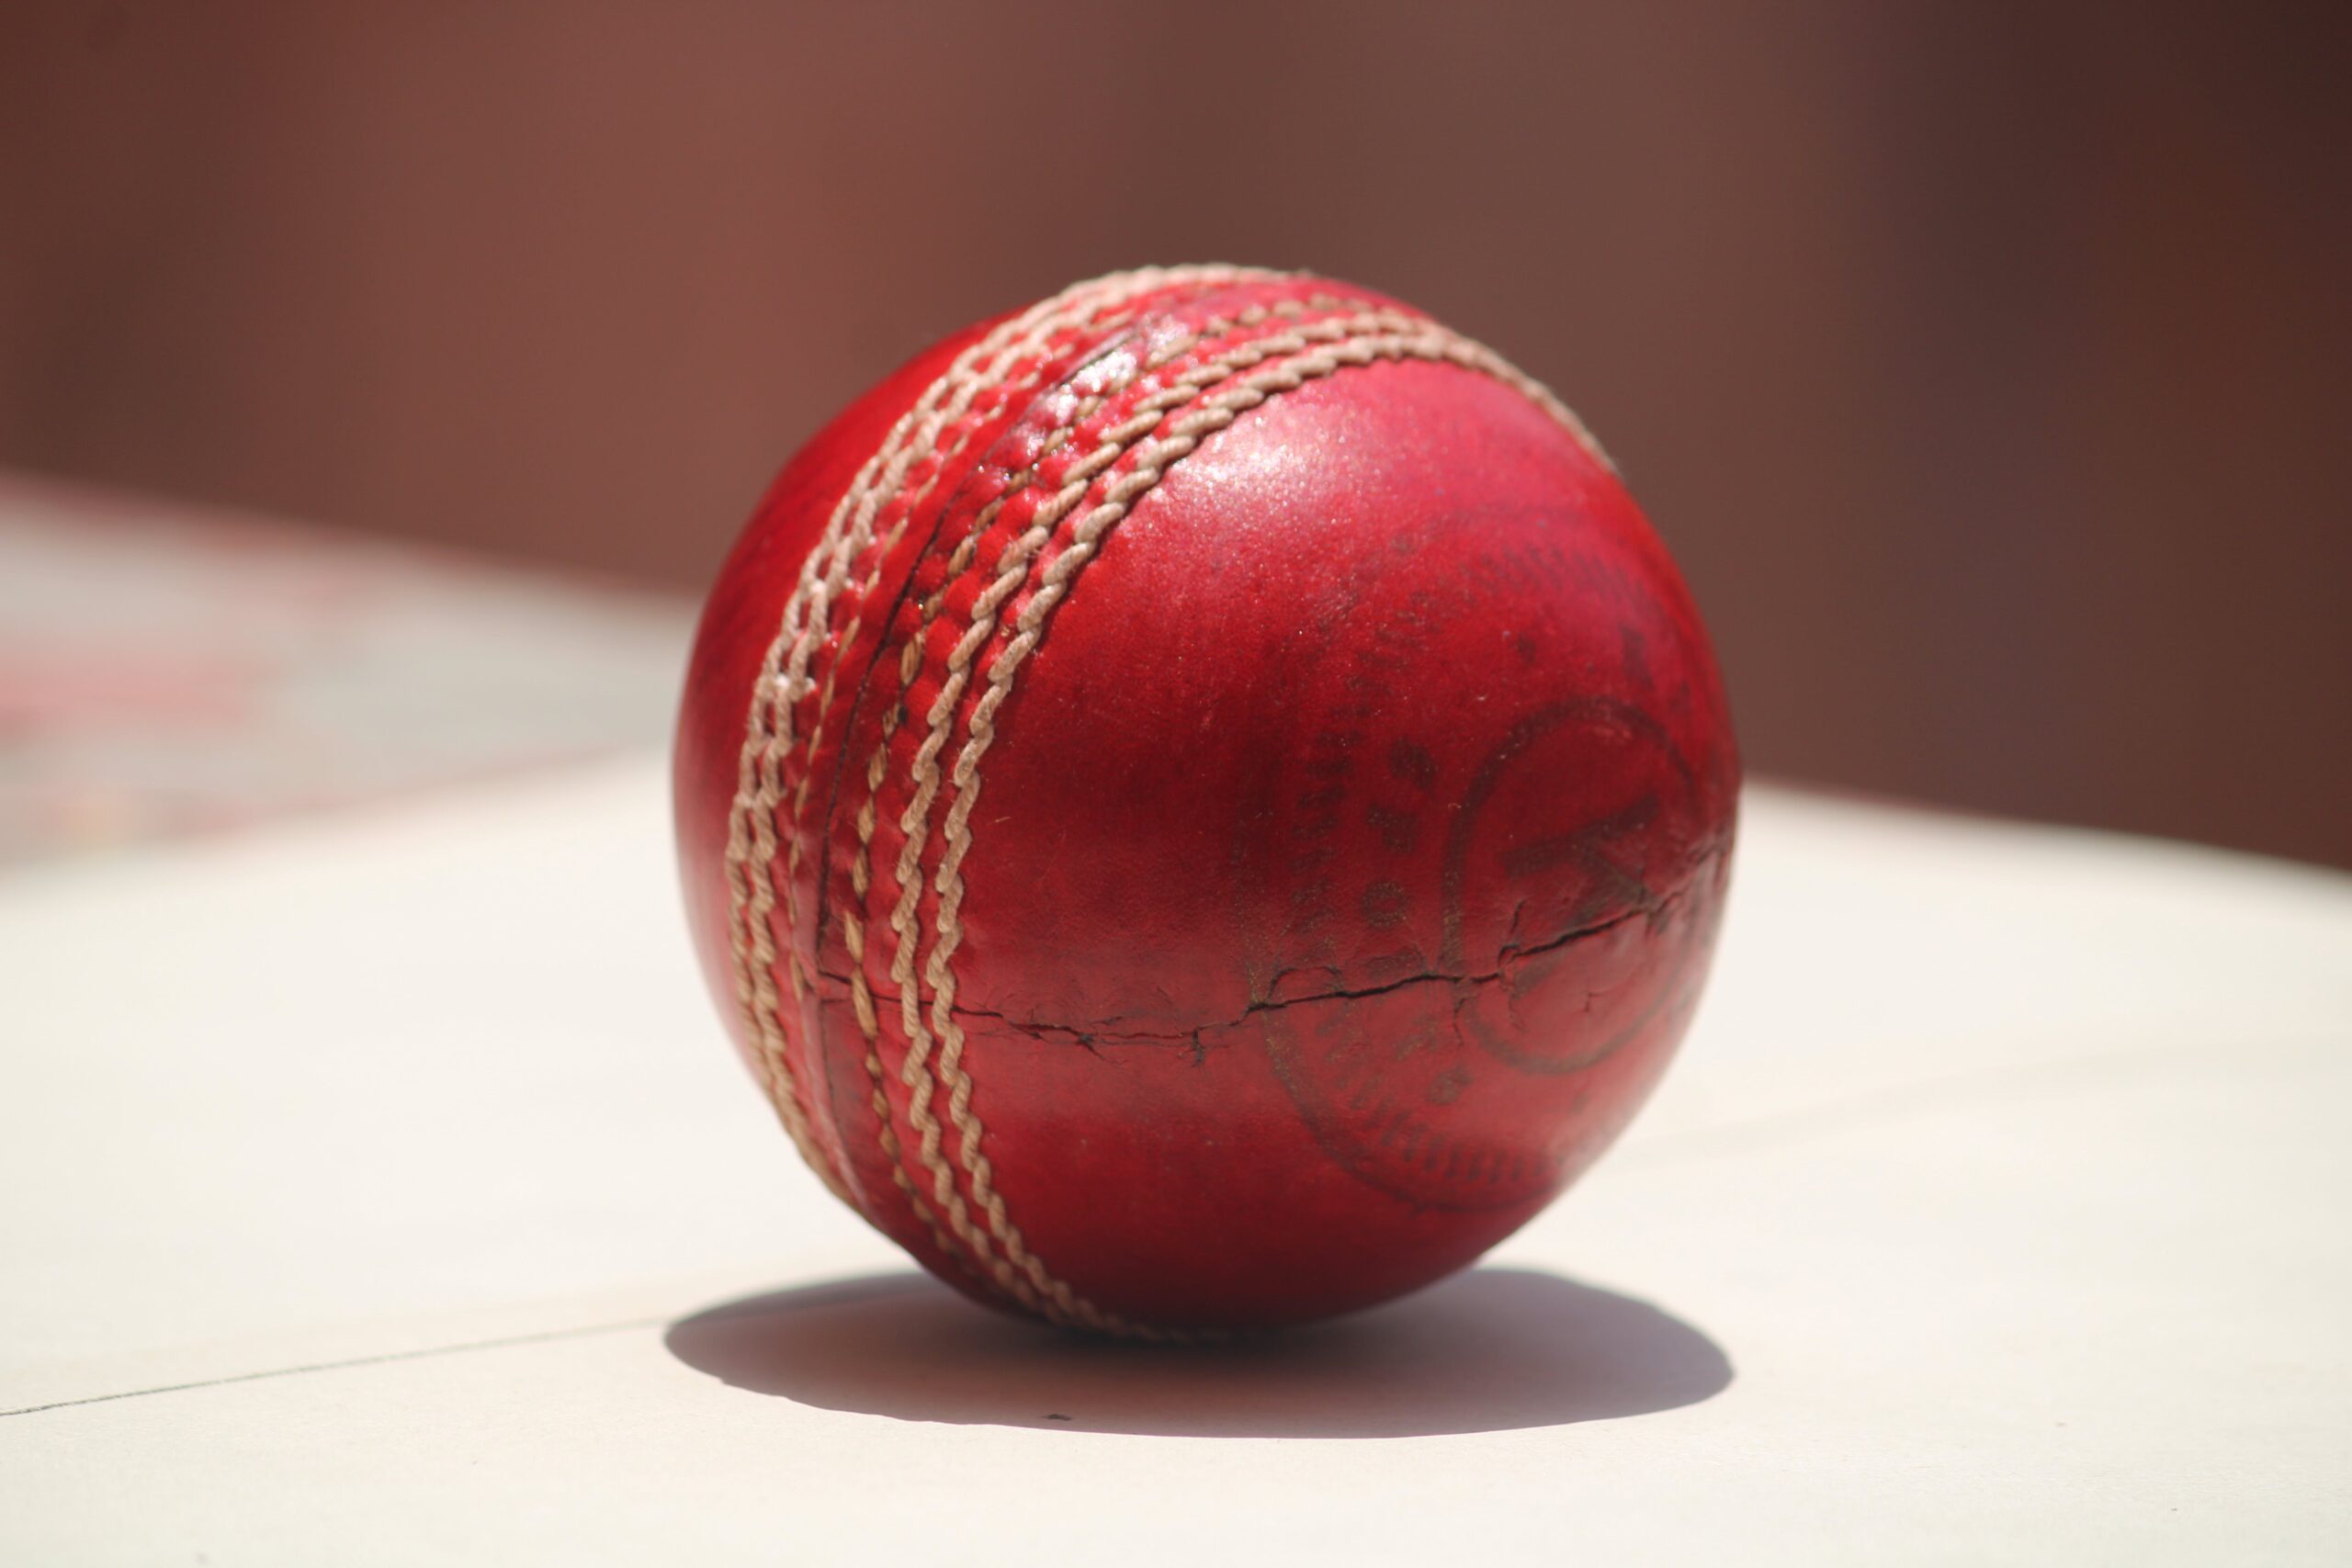 Cricket ball on a wooden bench in Lincolnshire